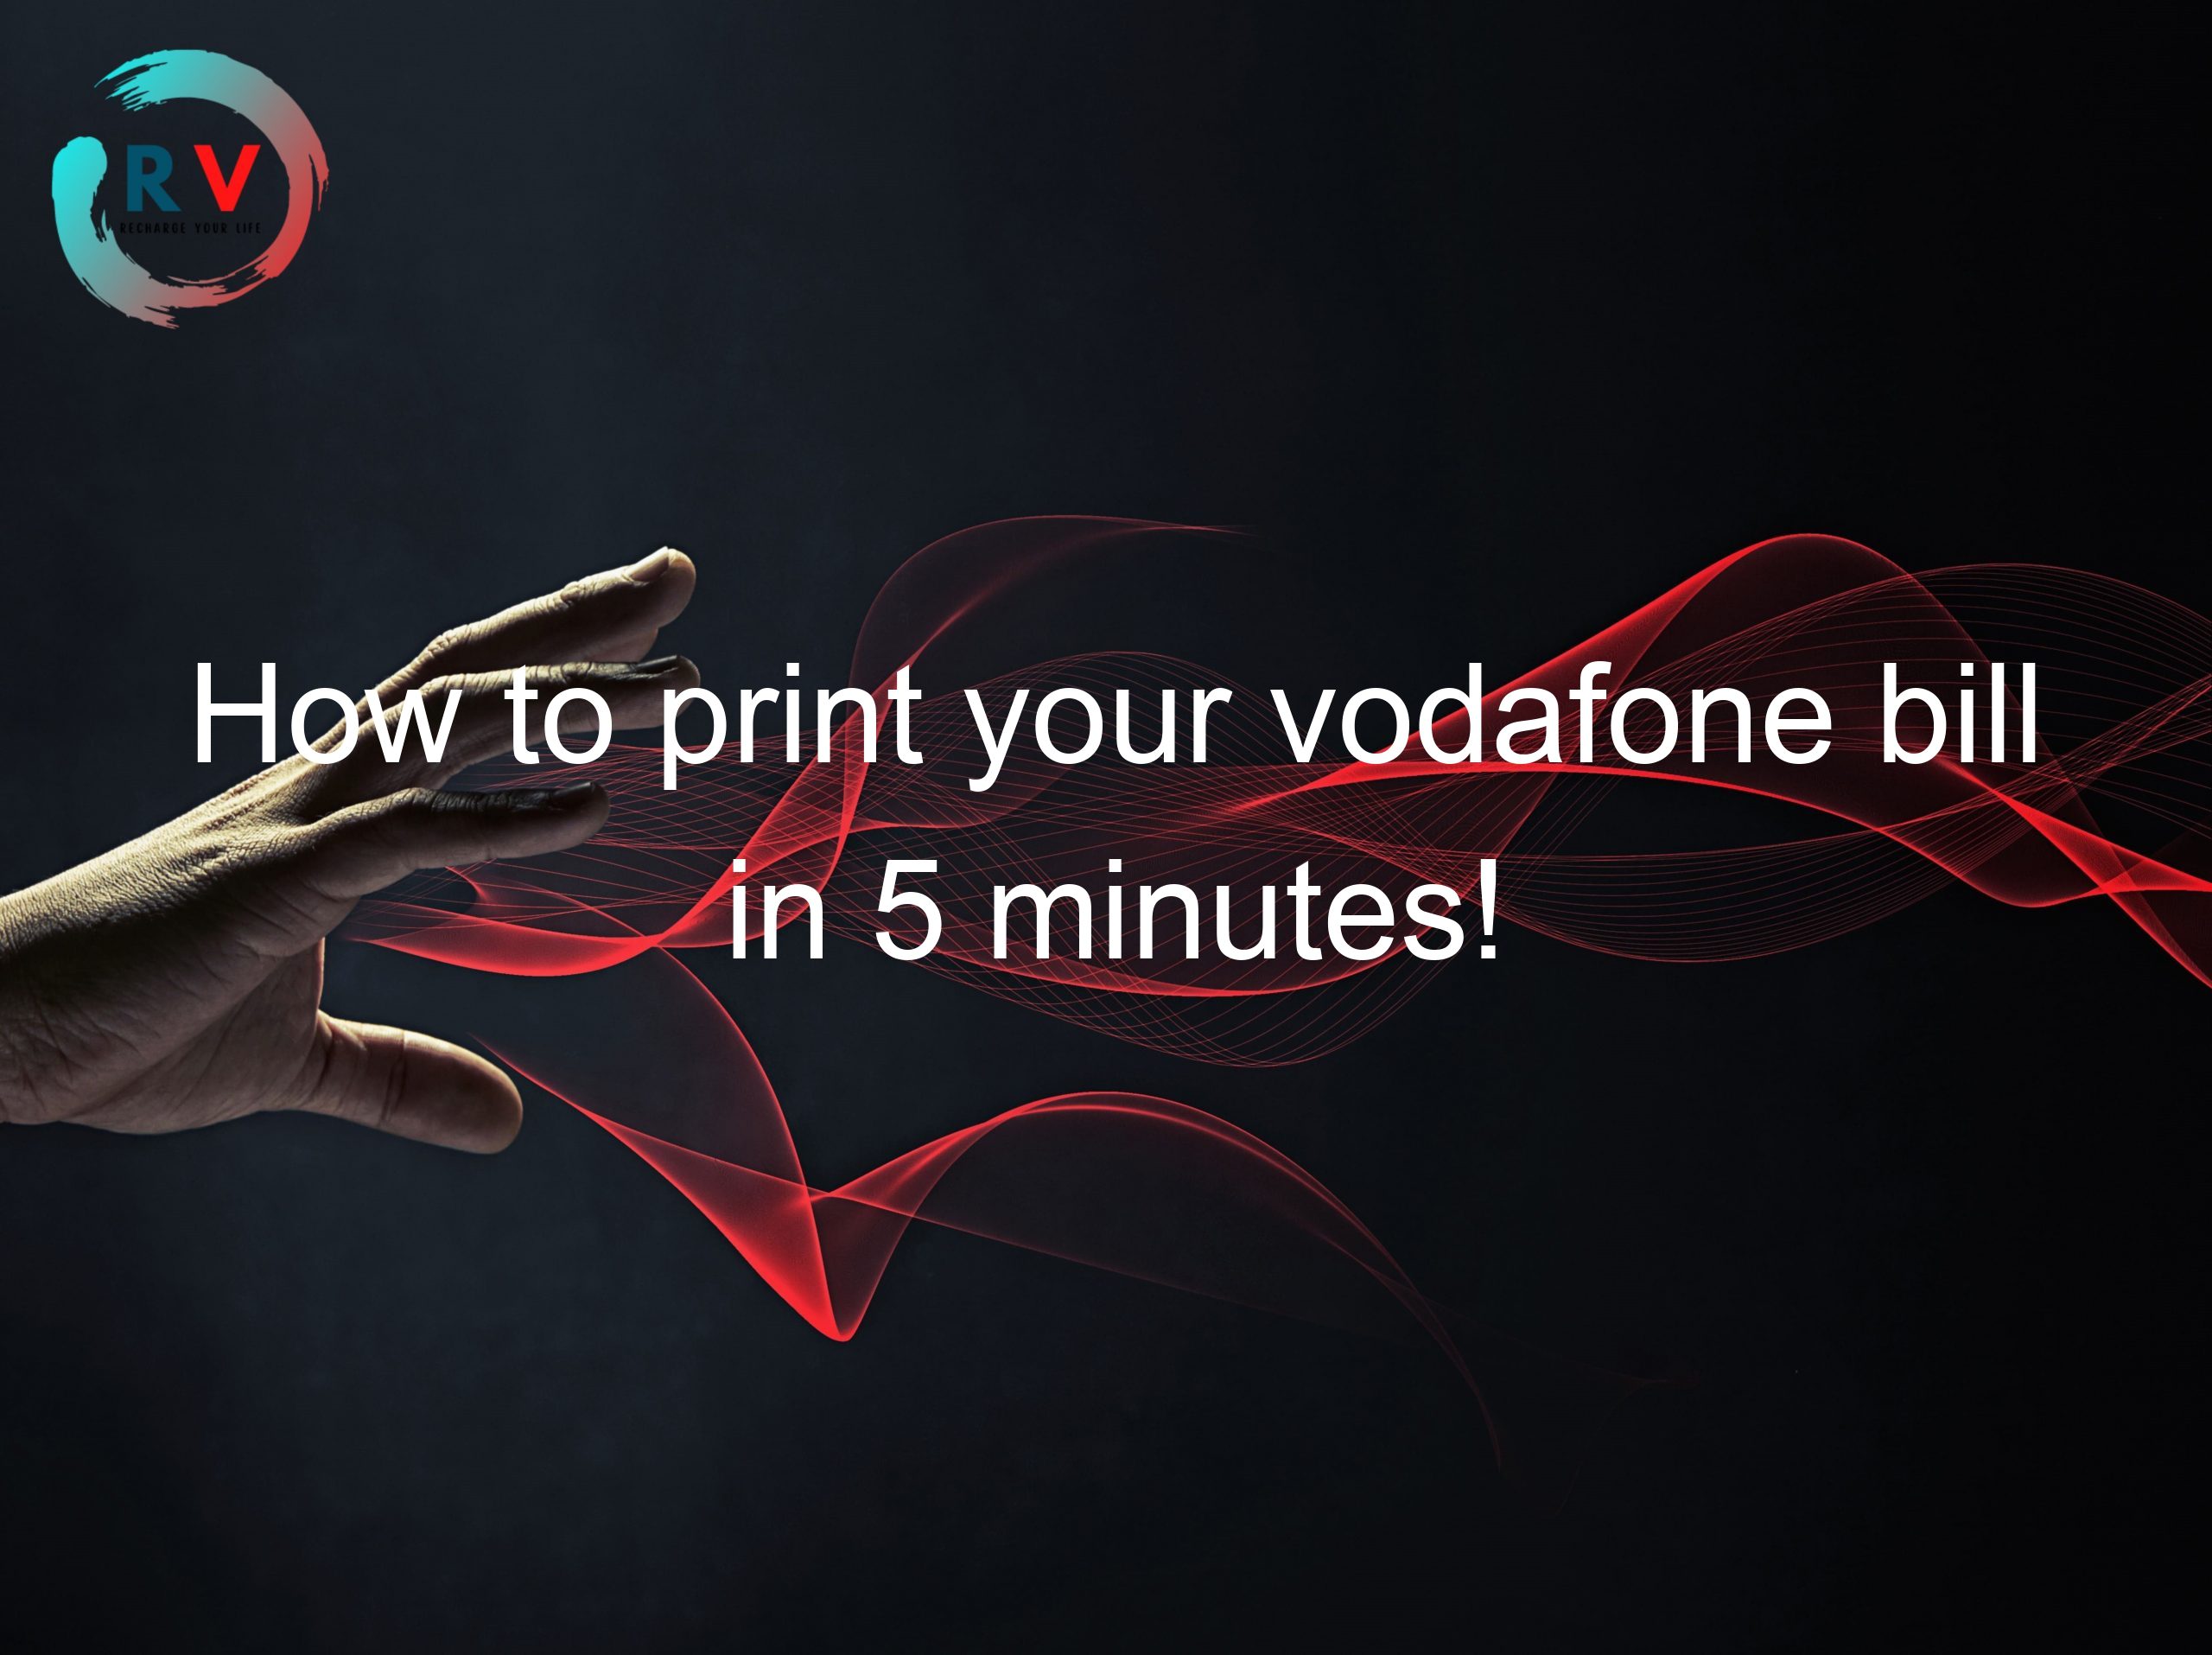 How to print your vodafone bill in 5 minutes!